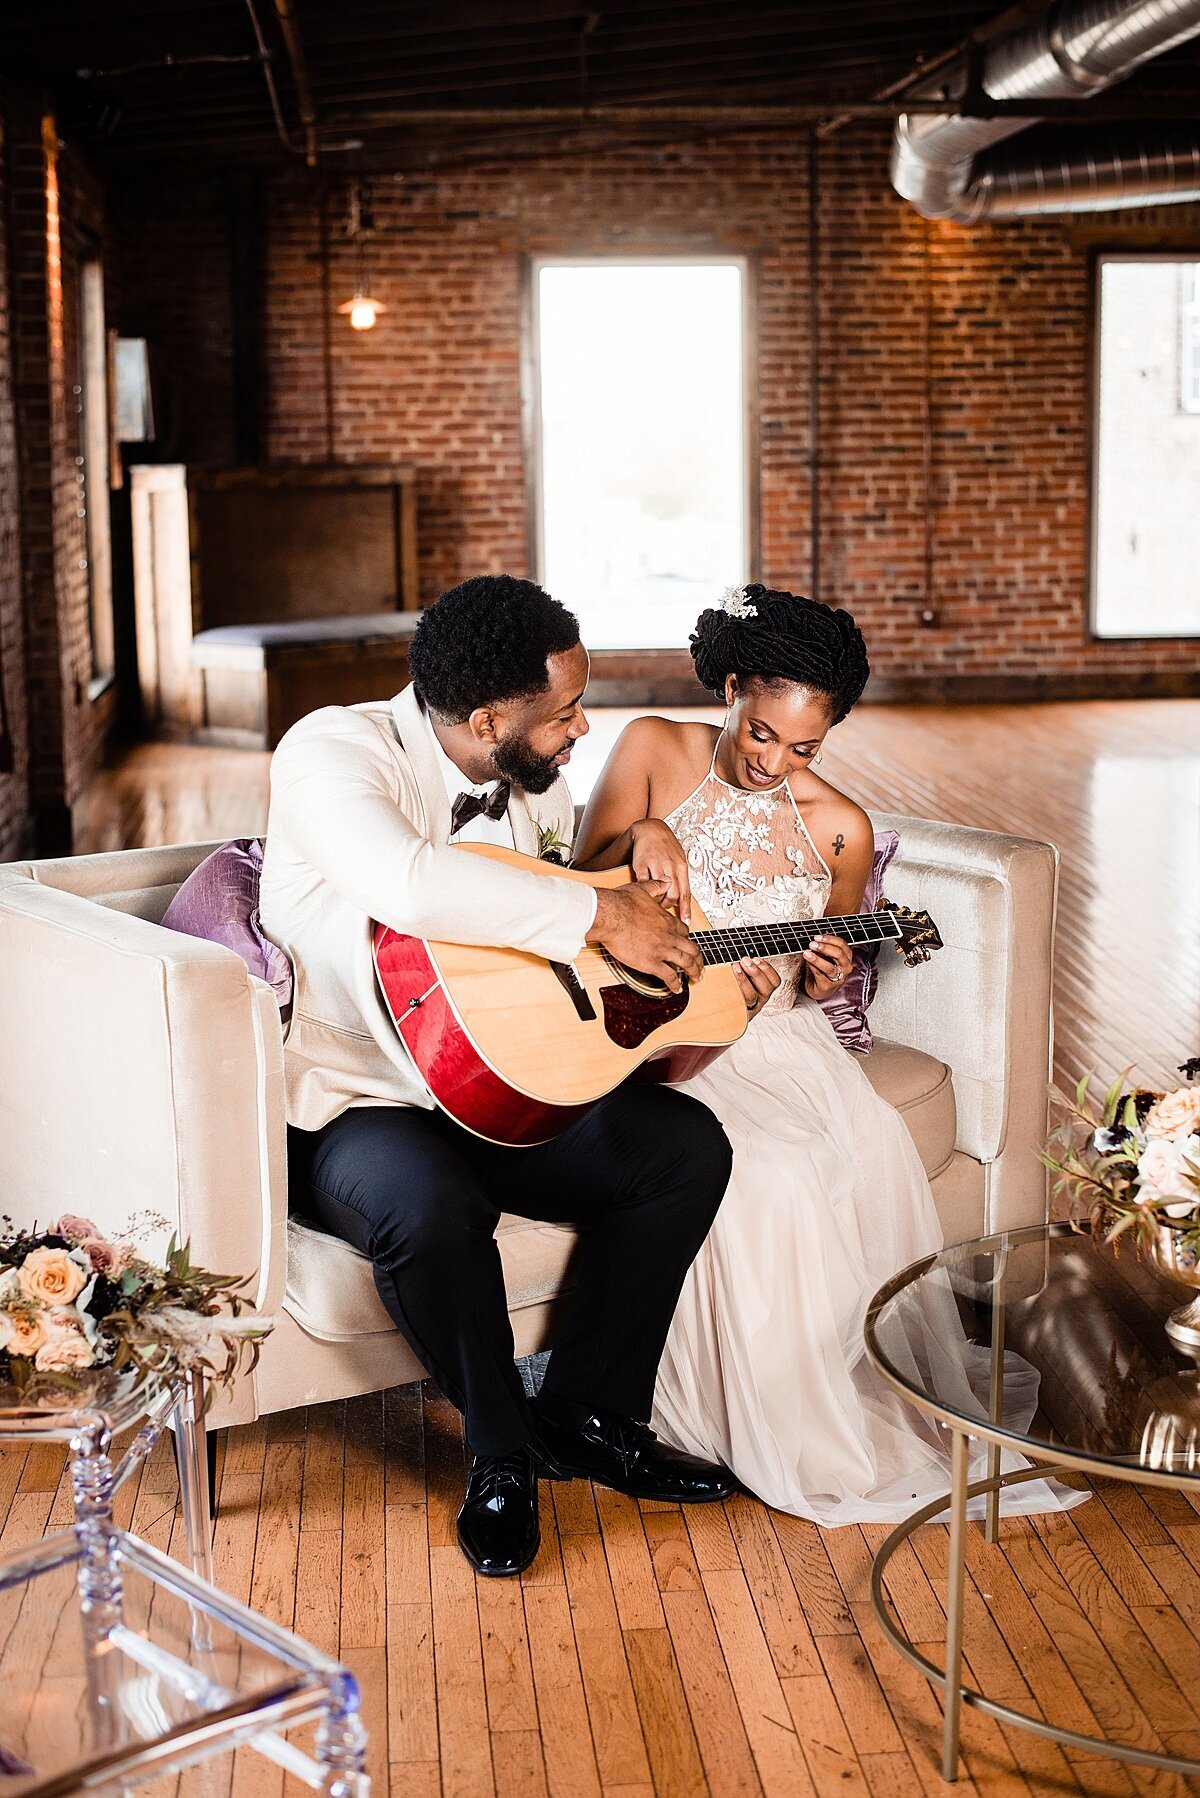 The bride and groom sit in an exposed brick space with hand wood floors and clear glass coffee tables with metal accents and floral bouquets on each table. They are sitting on a white couch as  the groom shows the bride how to play guitar. The groom is wearing a white tuxedo jacket with a white shirt, black bow tie and  black pants. The bride is wearing a halter neck lace wedding dress dress with a  long flowing skirt.